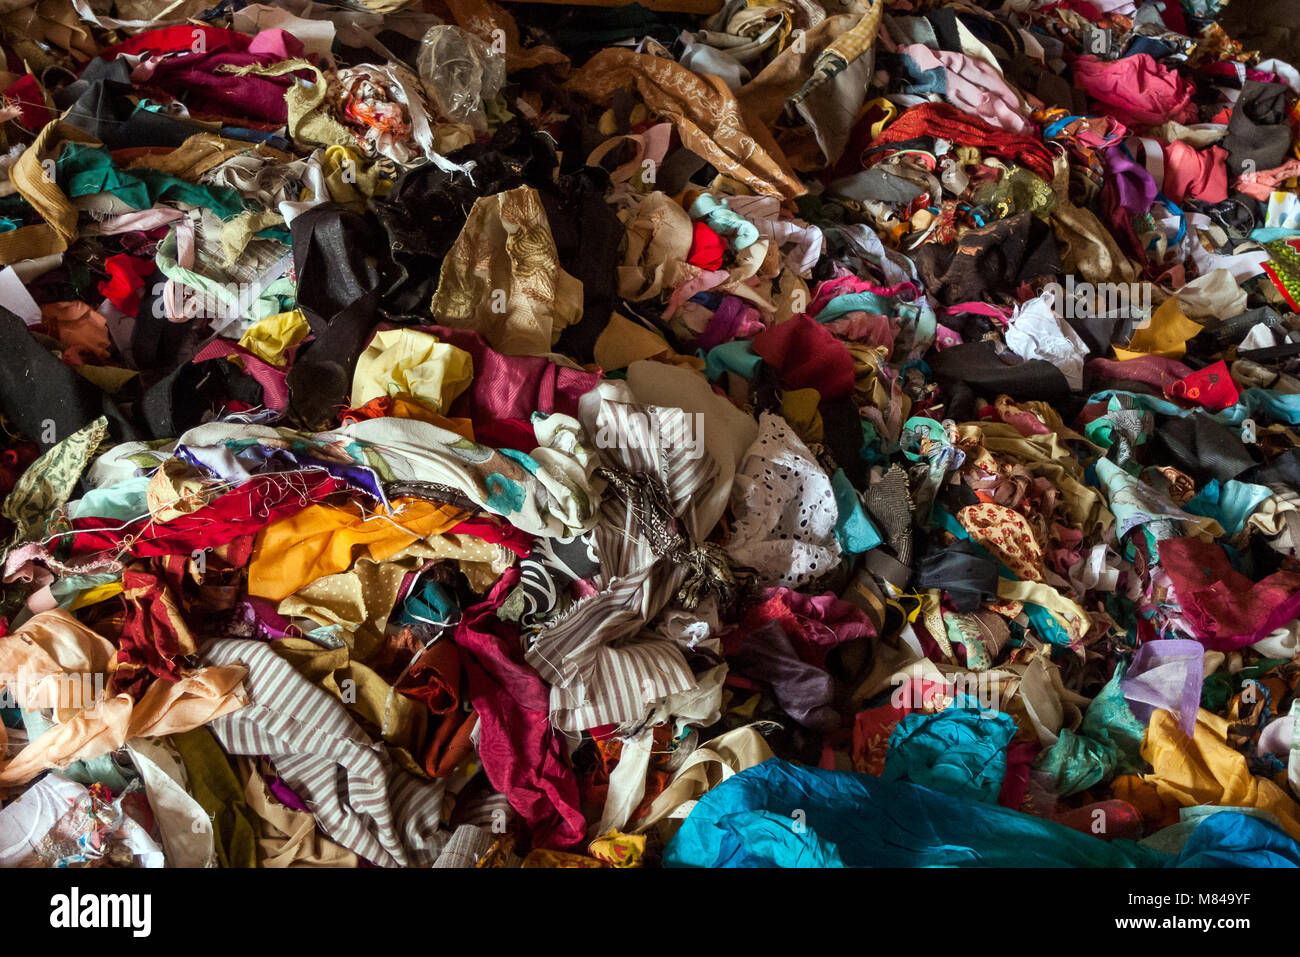 Chandigarh, India: A bunch of colorful rags Stock Photo